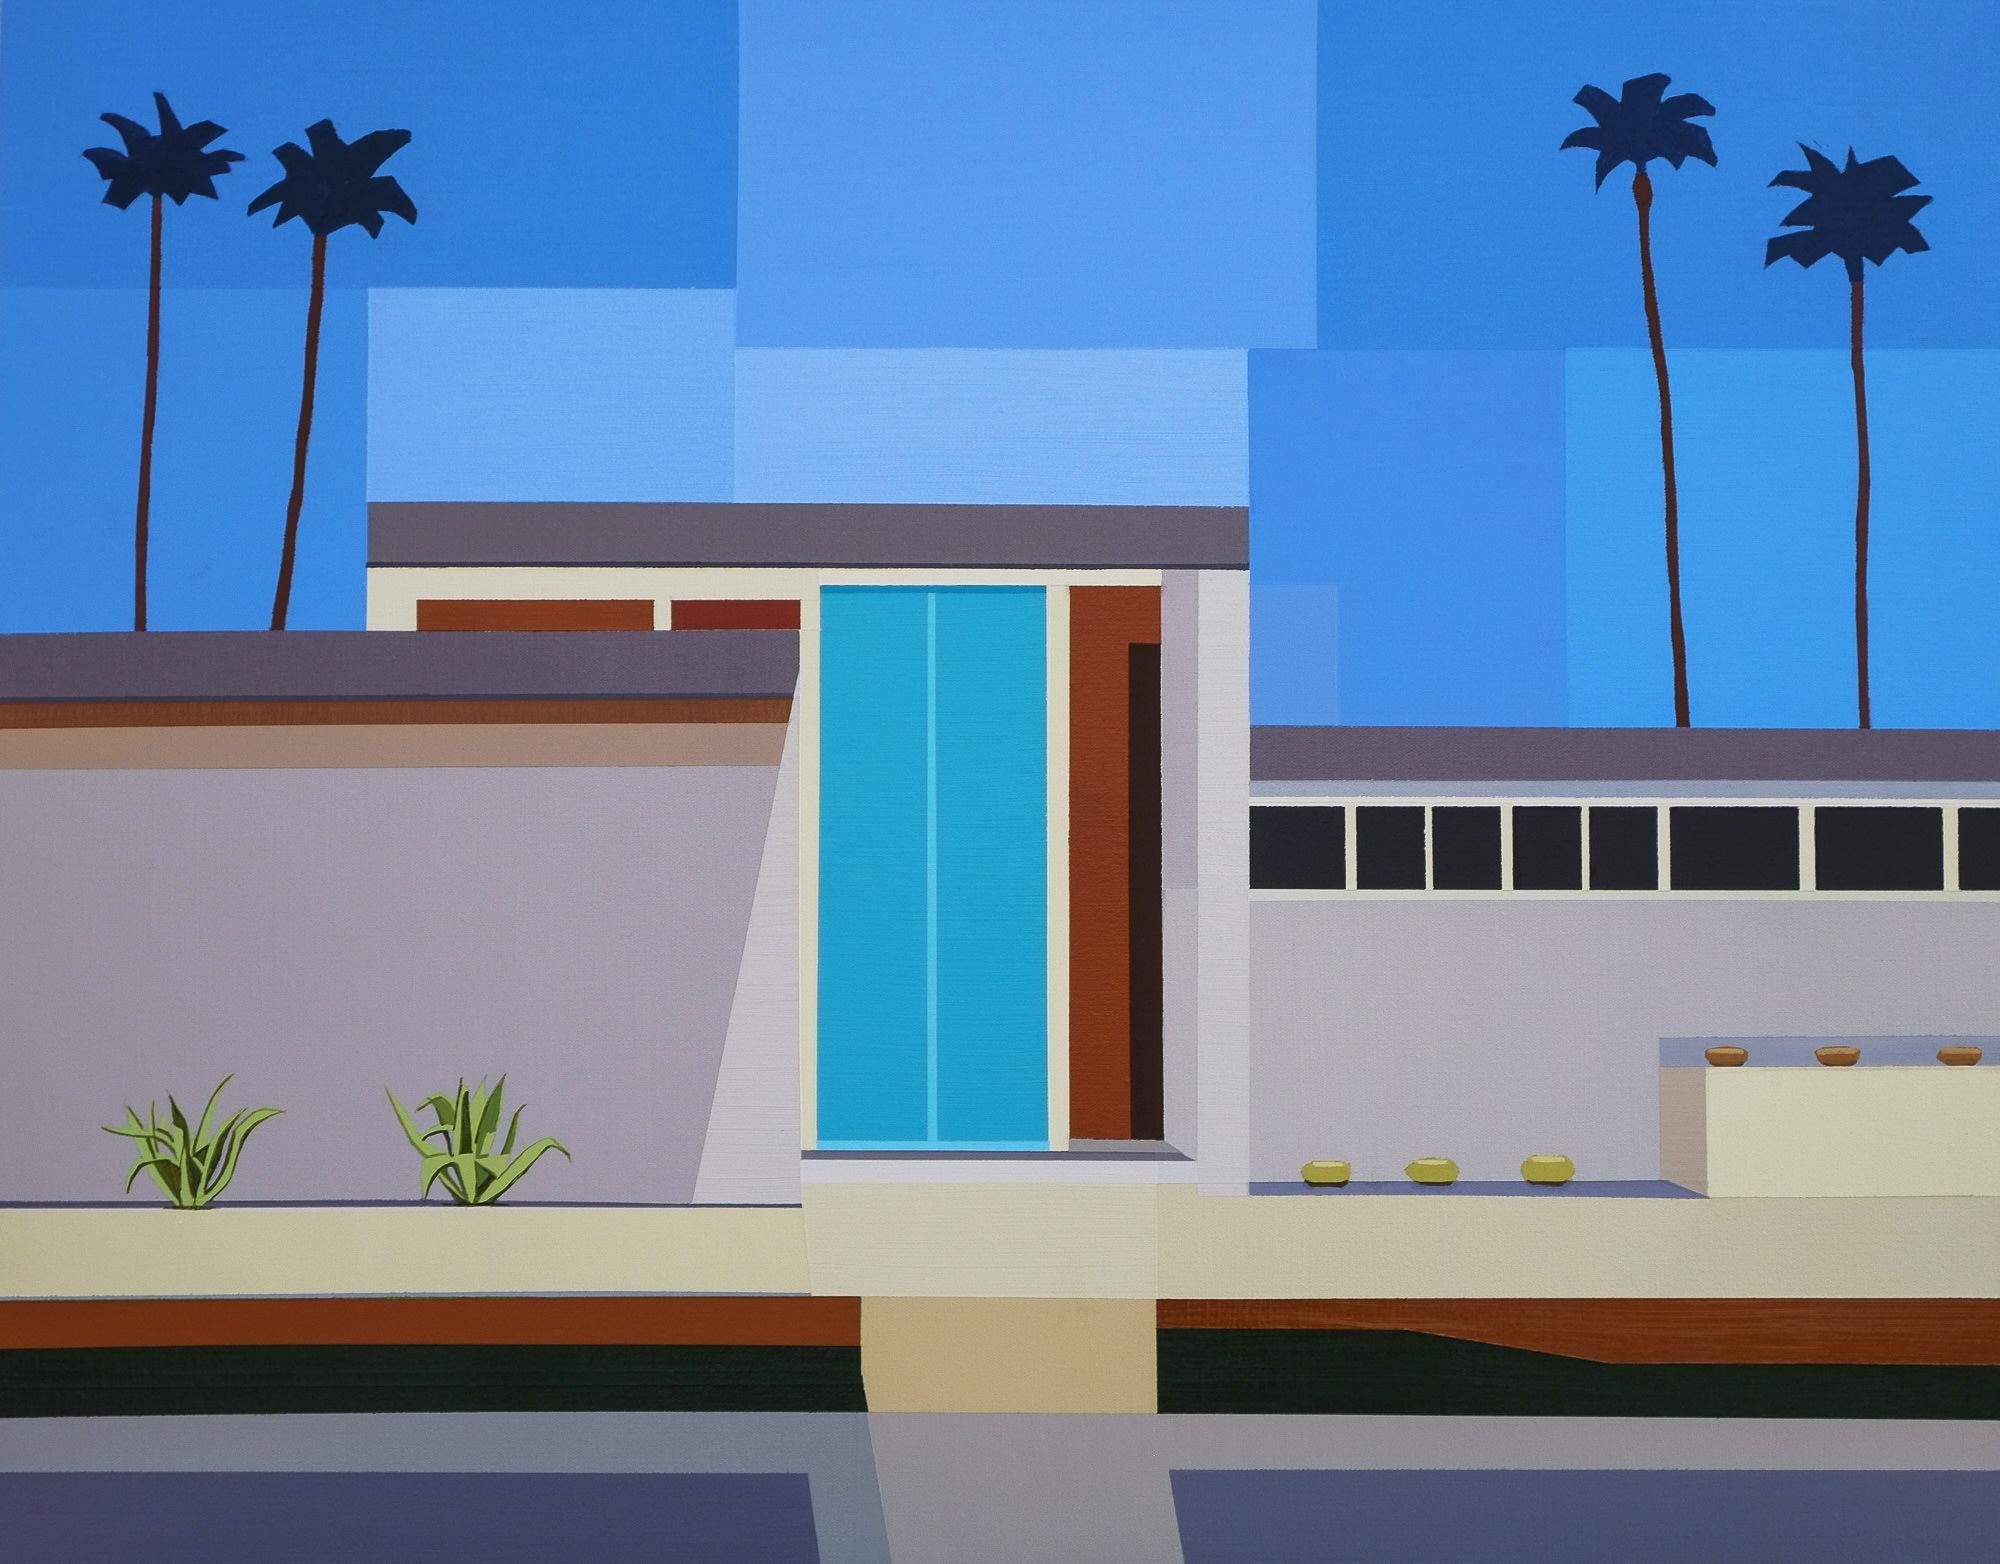 Signed, dated recto
Acrylic on Canvas over Panel
Unframed: 22 x 28 in.
Framed: 23 1/2 x 29 1/2 in.
(AB342)

Andy Burgess is known for his renditions of modernist and mid-century architecture, panoramic cityscape paintings, and elaborate mosaic-like